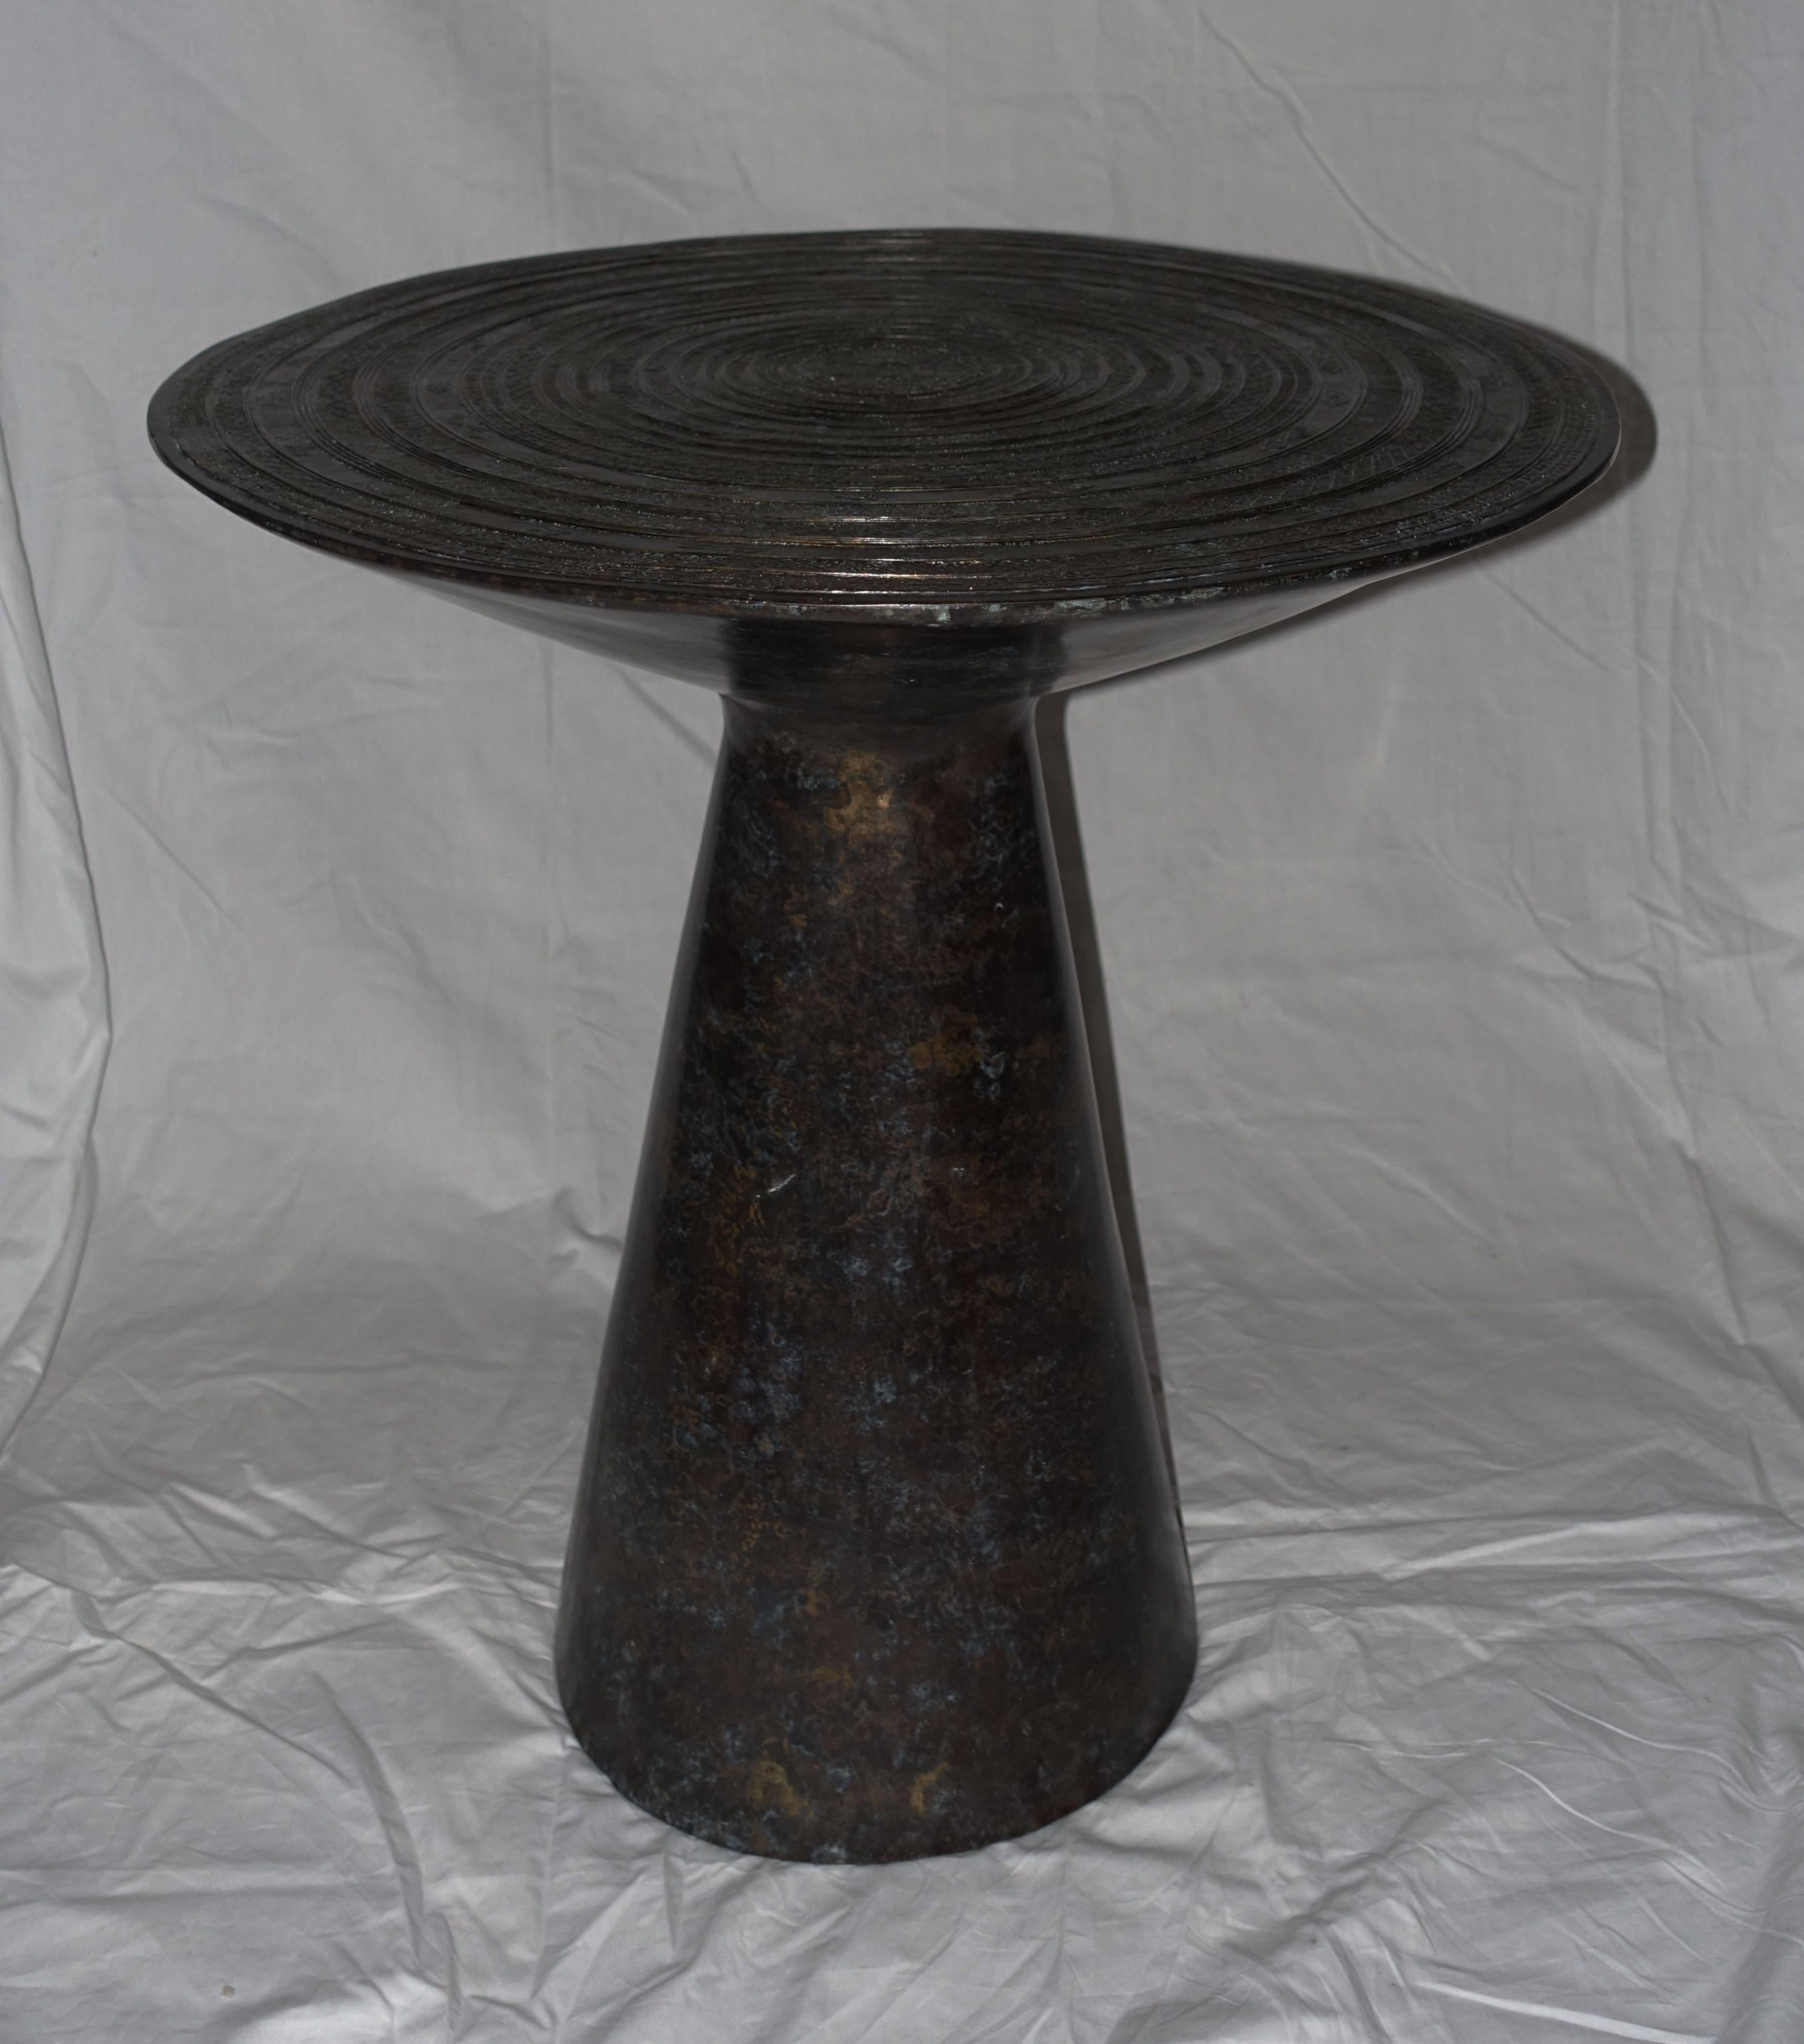 Contemporary Cambodian bronze round side table.
Top was originally a chieftain drum. Now placed on a round pedestal base.
Excellent condition.
  
 